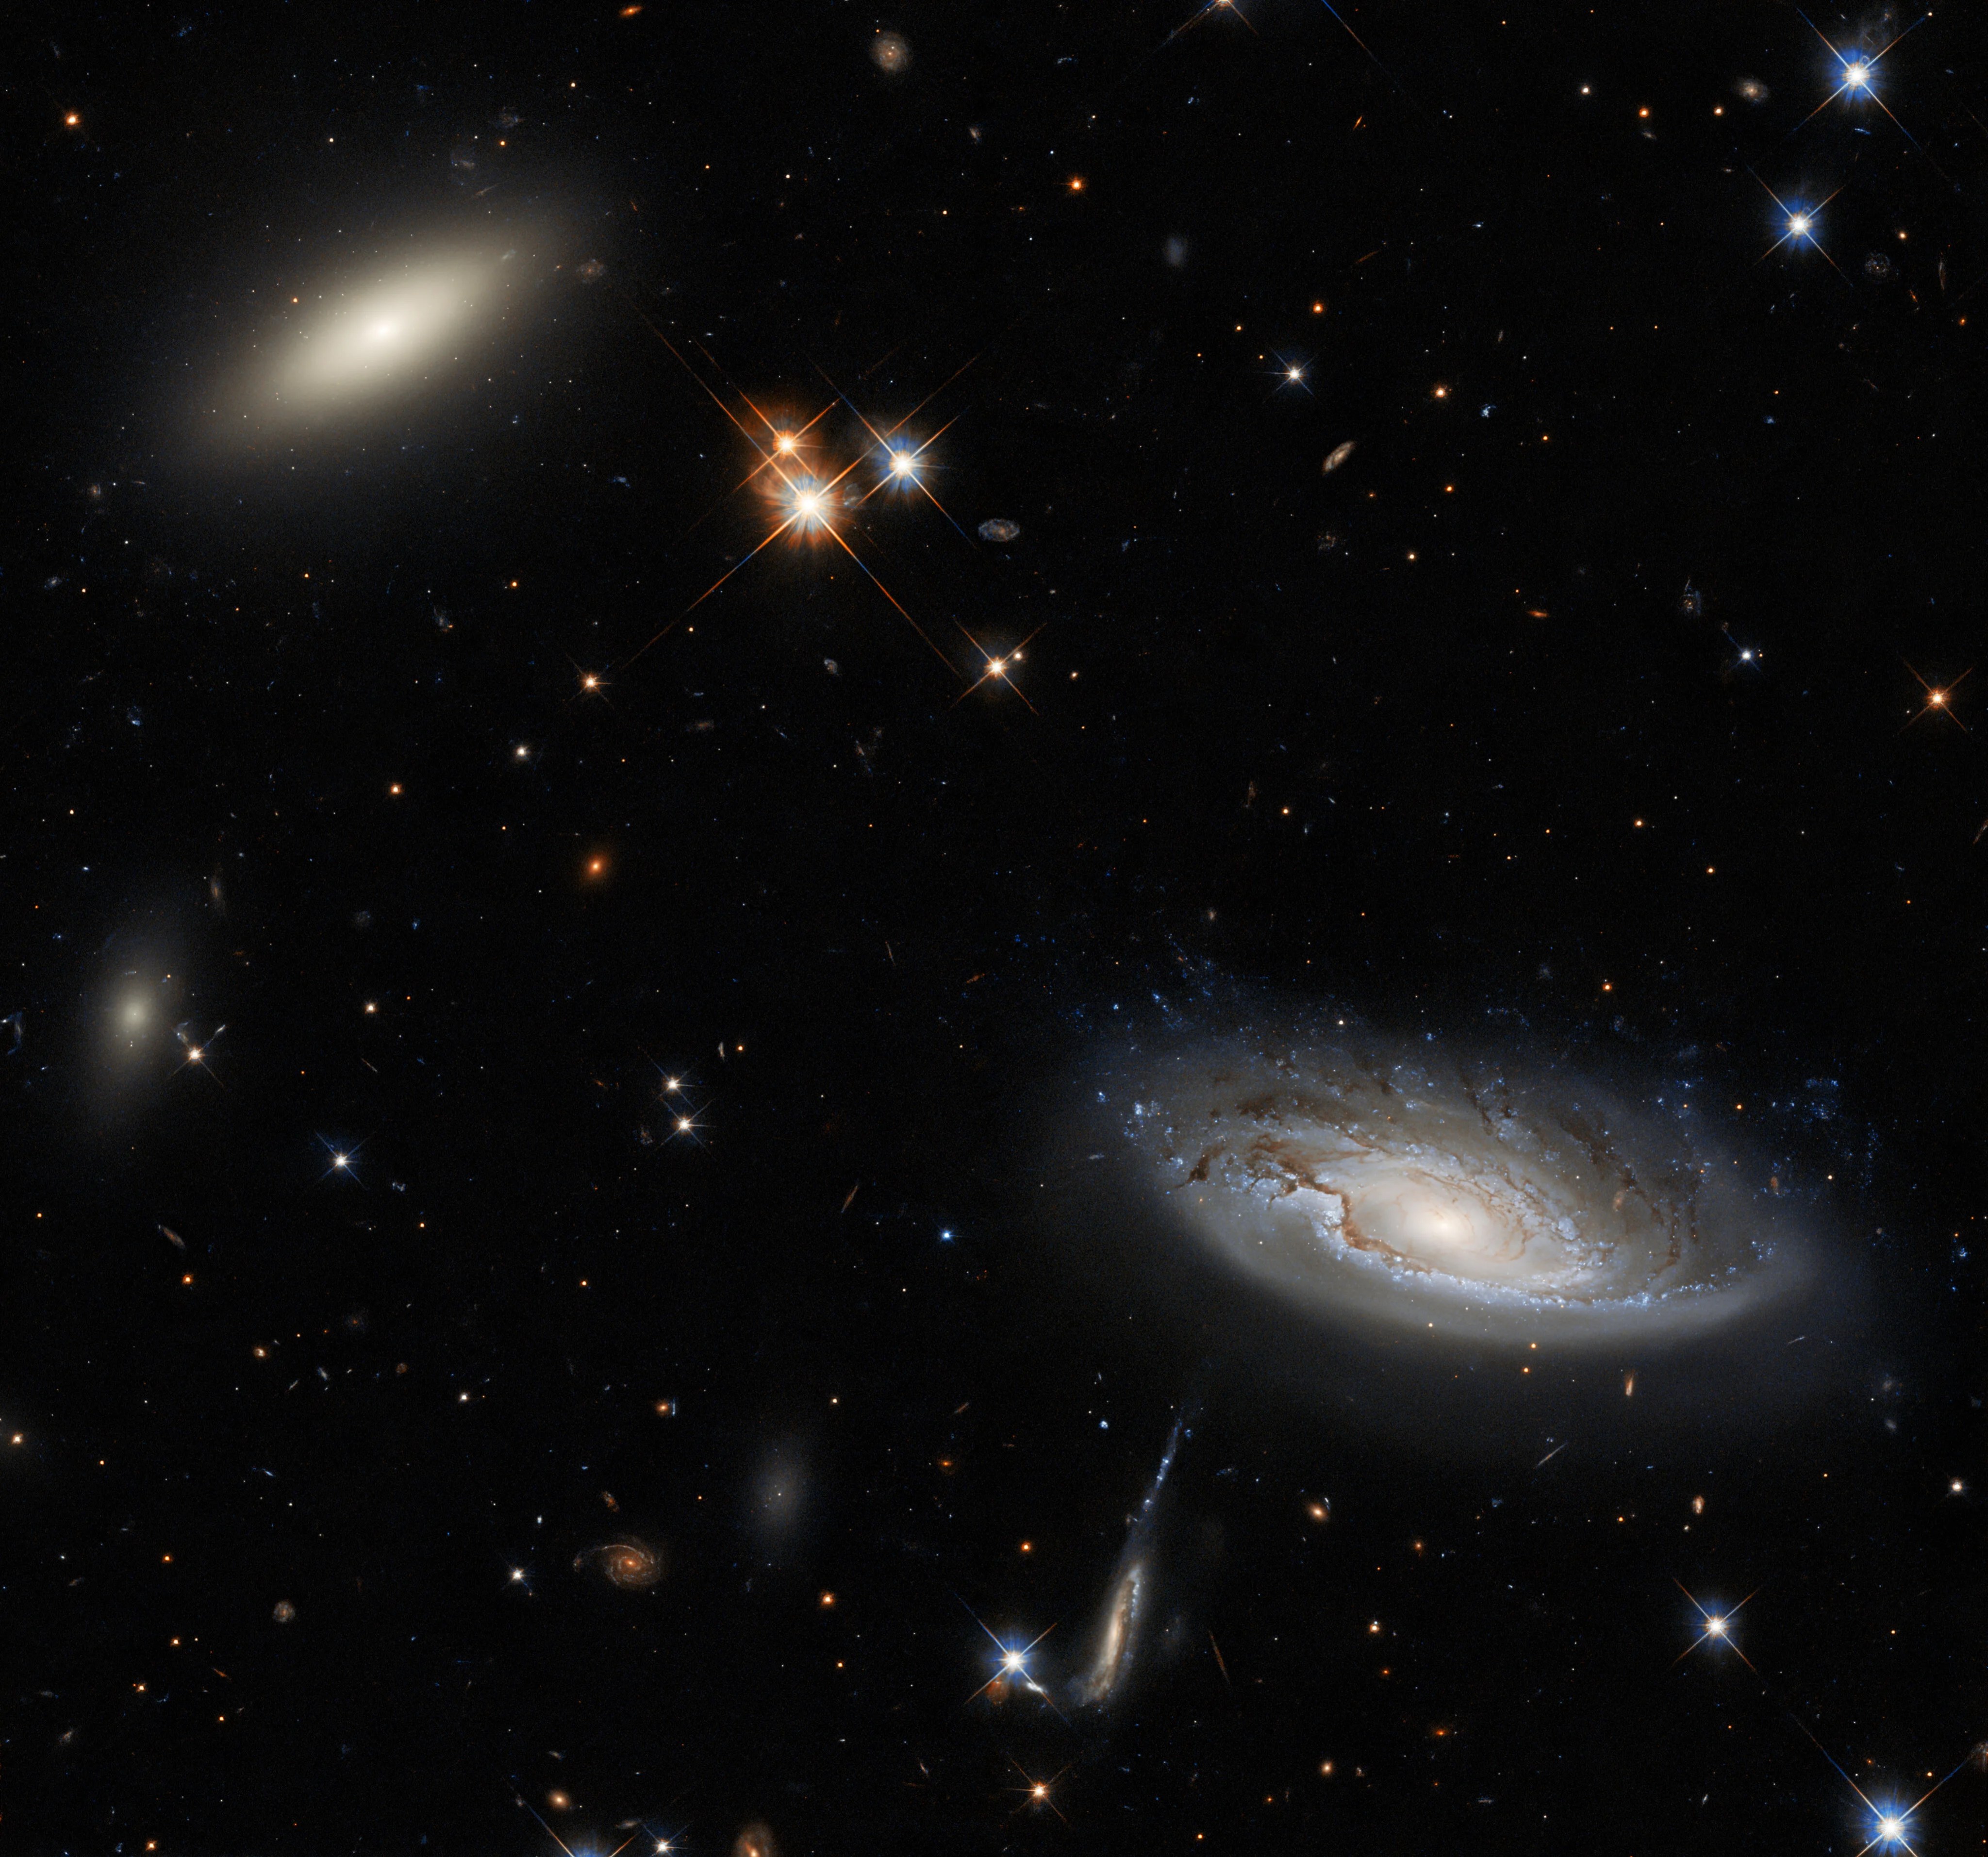 Two enormous galaxies capture your attention in this spectacular image taken with the nasa/esa hubble space telescope using the wide field camera 3 (wfc3).